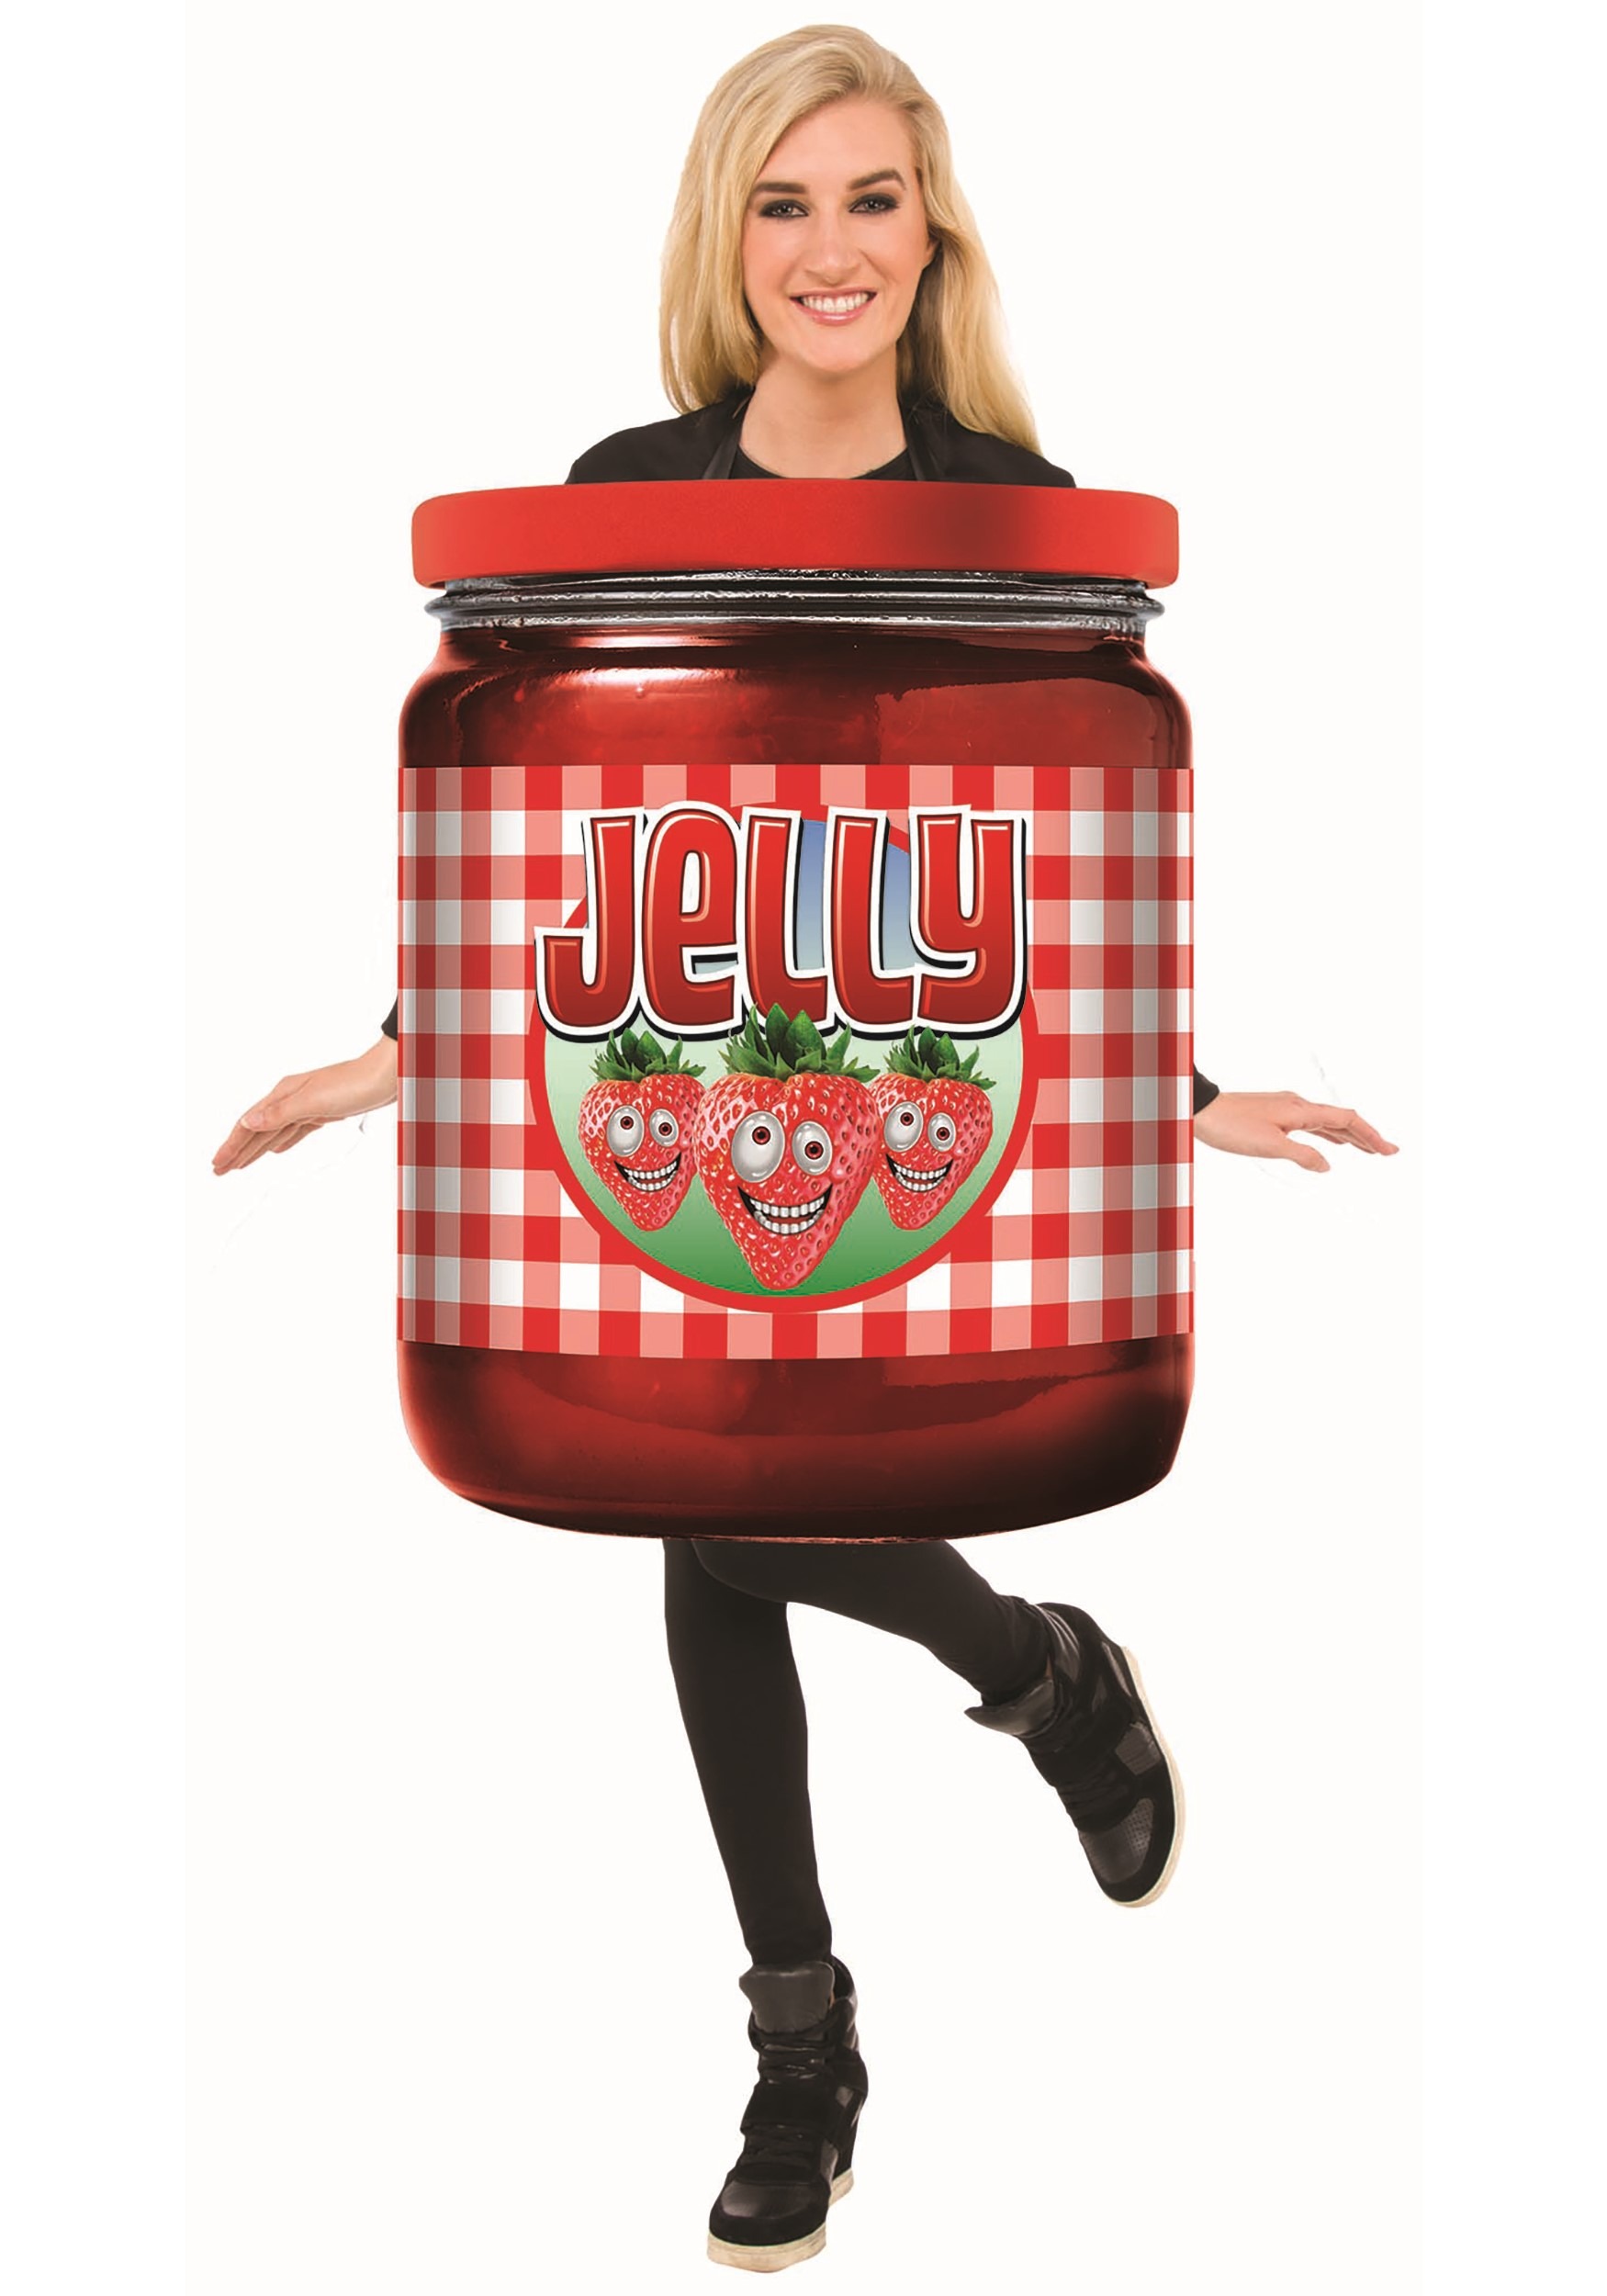 The Adult Jelly Jar Costume